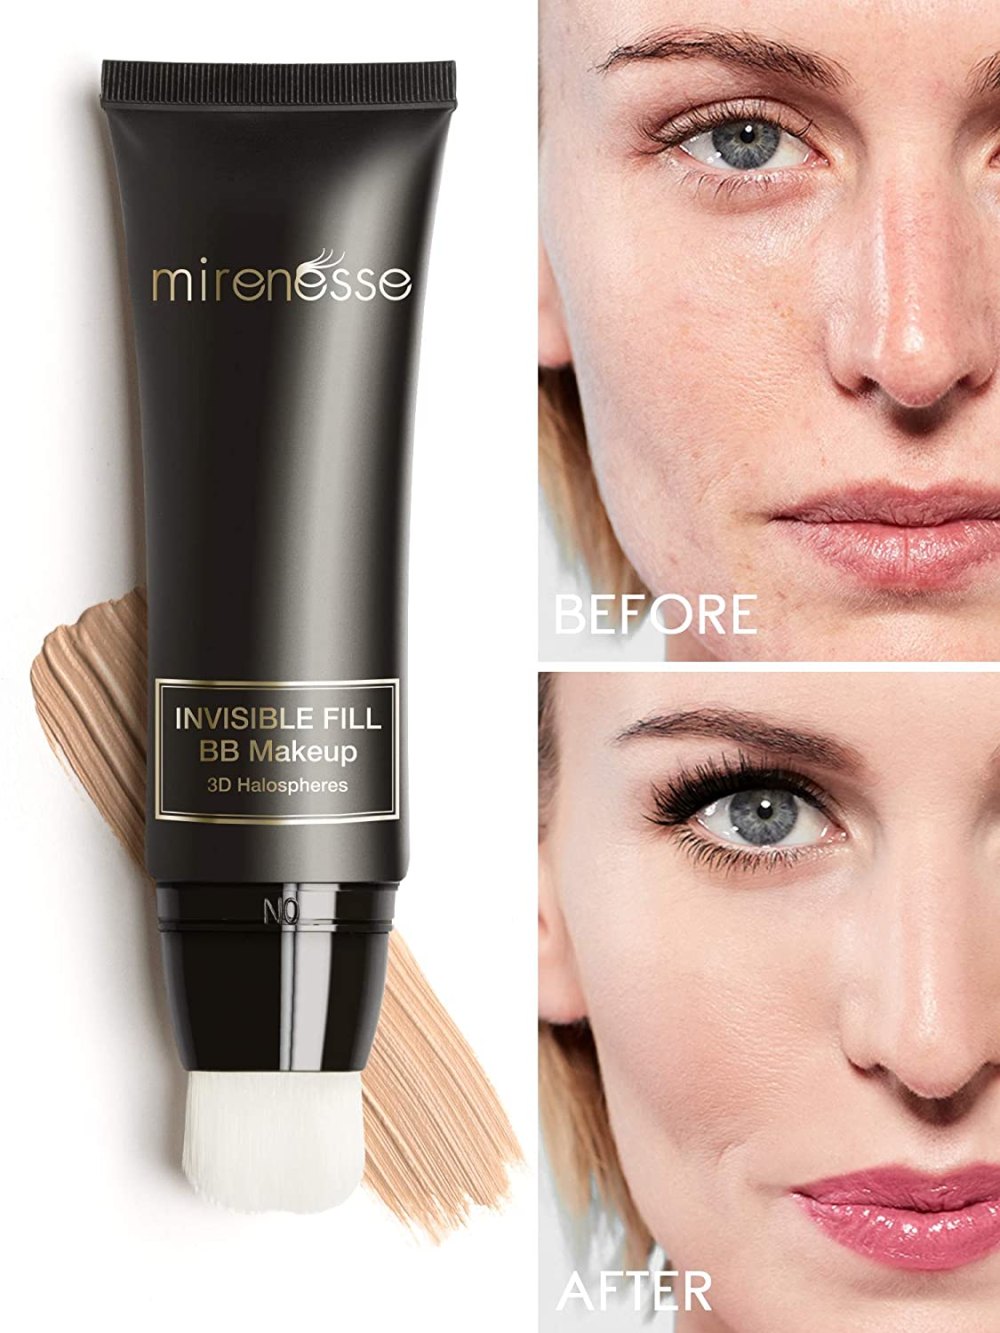 Mirenesse Invisible Fill BB Make Up